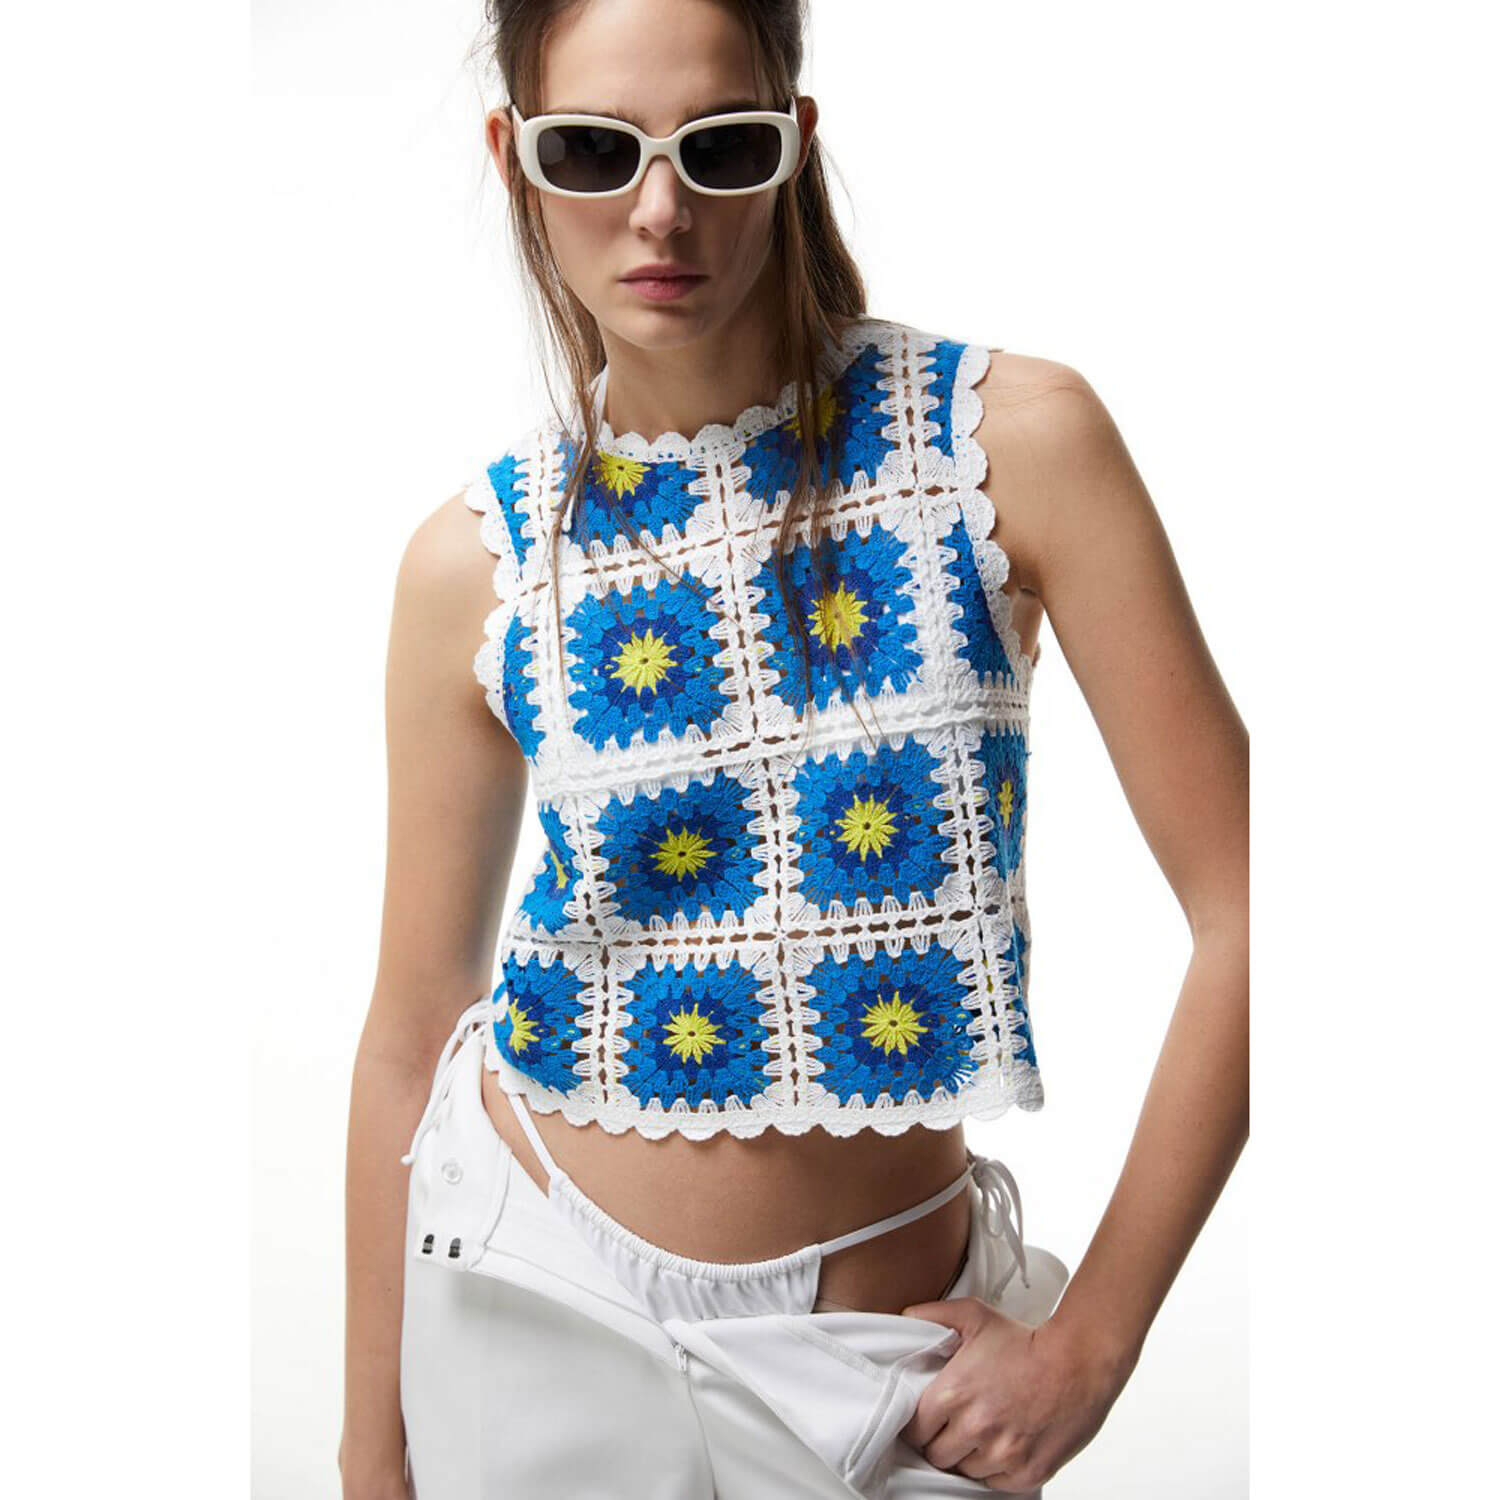 Sfera Strappy Crochet Top 1 Shaws Department Stores